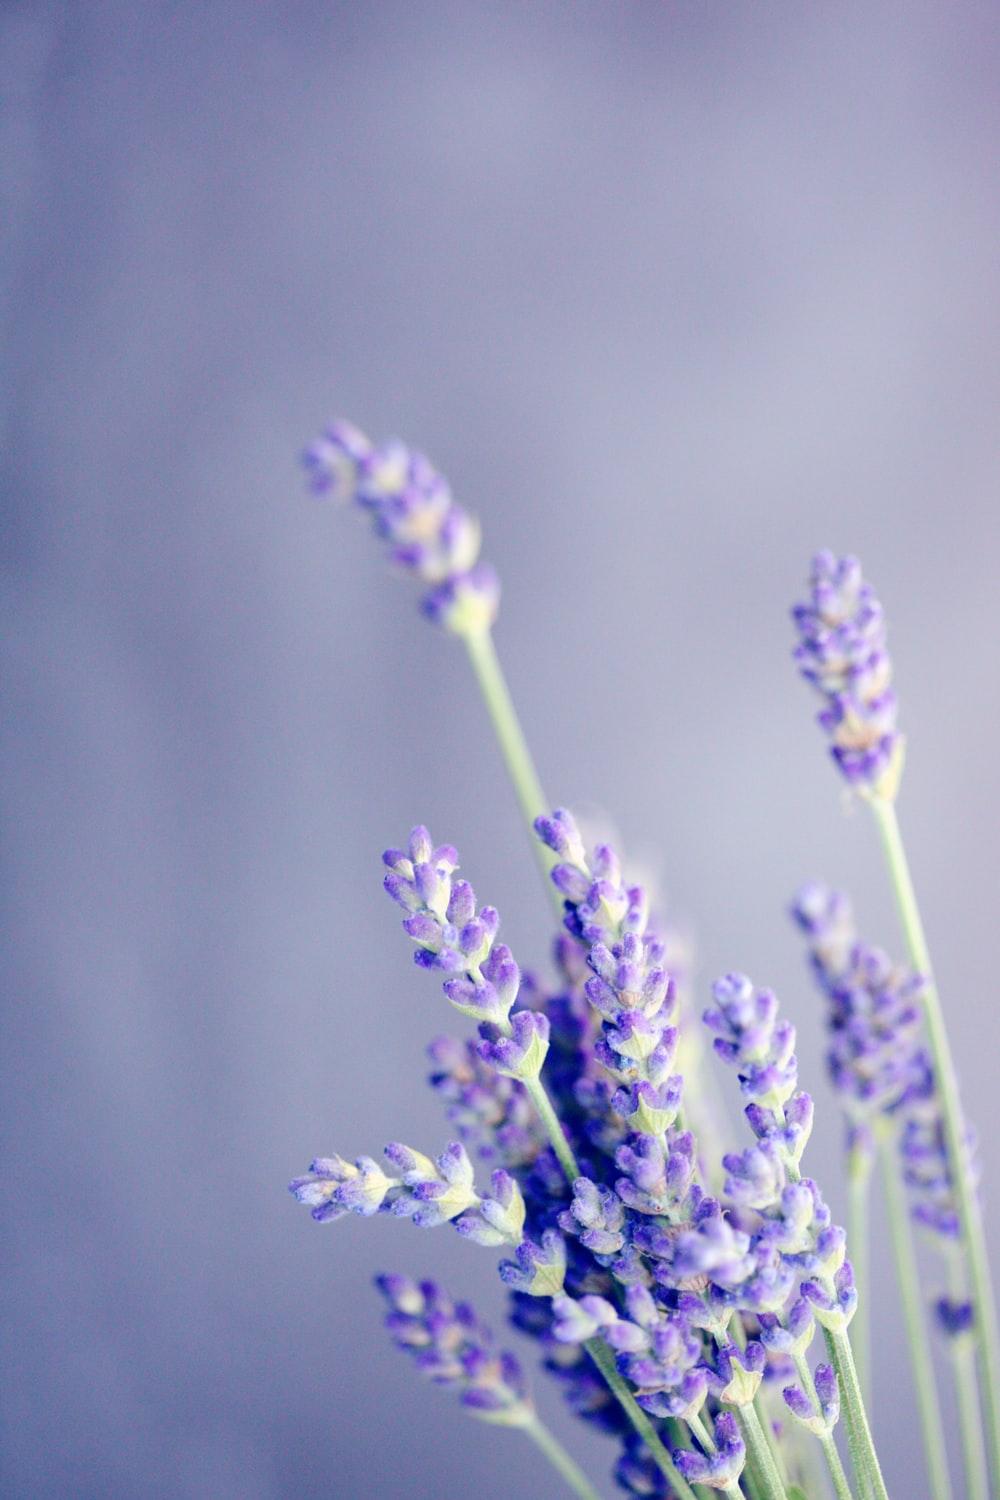 Iphone Wallpaper Lavender Images  Free Photos PNG Stickers Wallpapers   Backgrounds  rawpixel